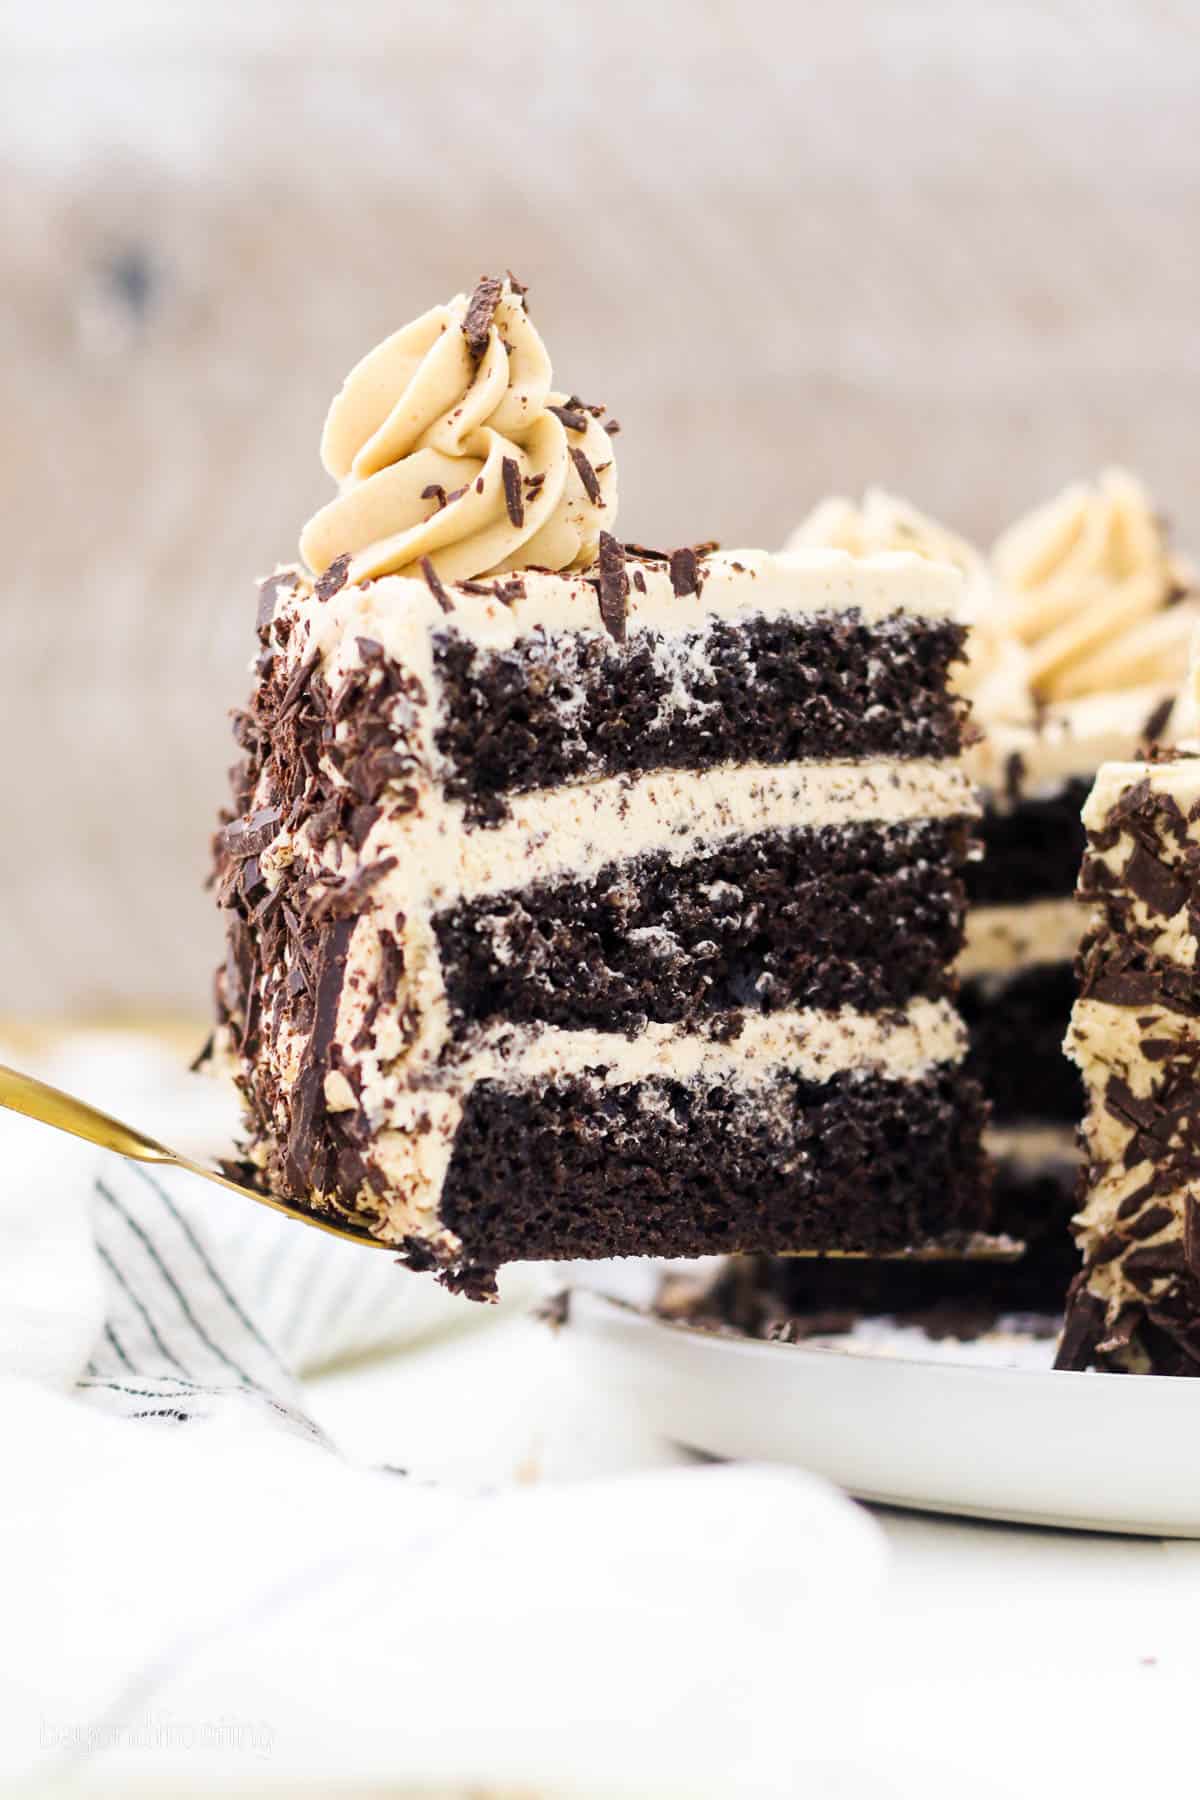 A slice is lifted from a frosted chocolate mocha cake, revealing the layers.